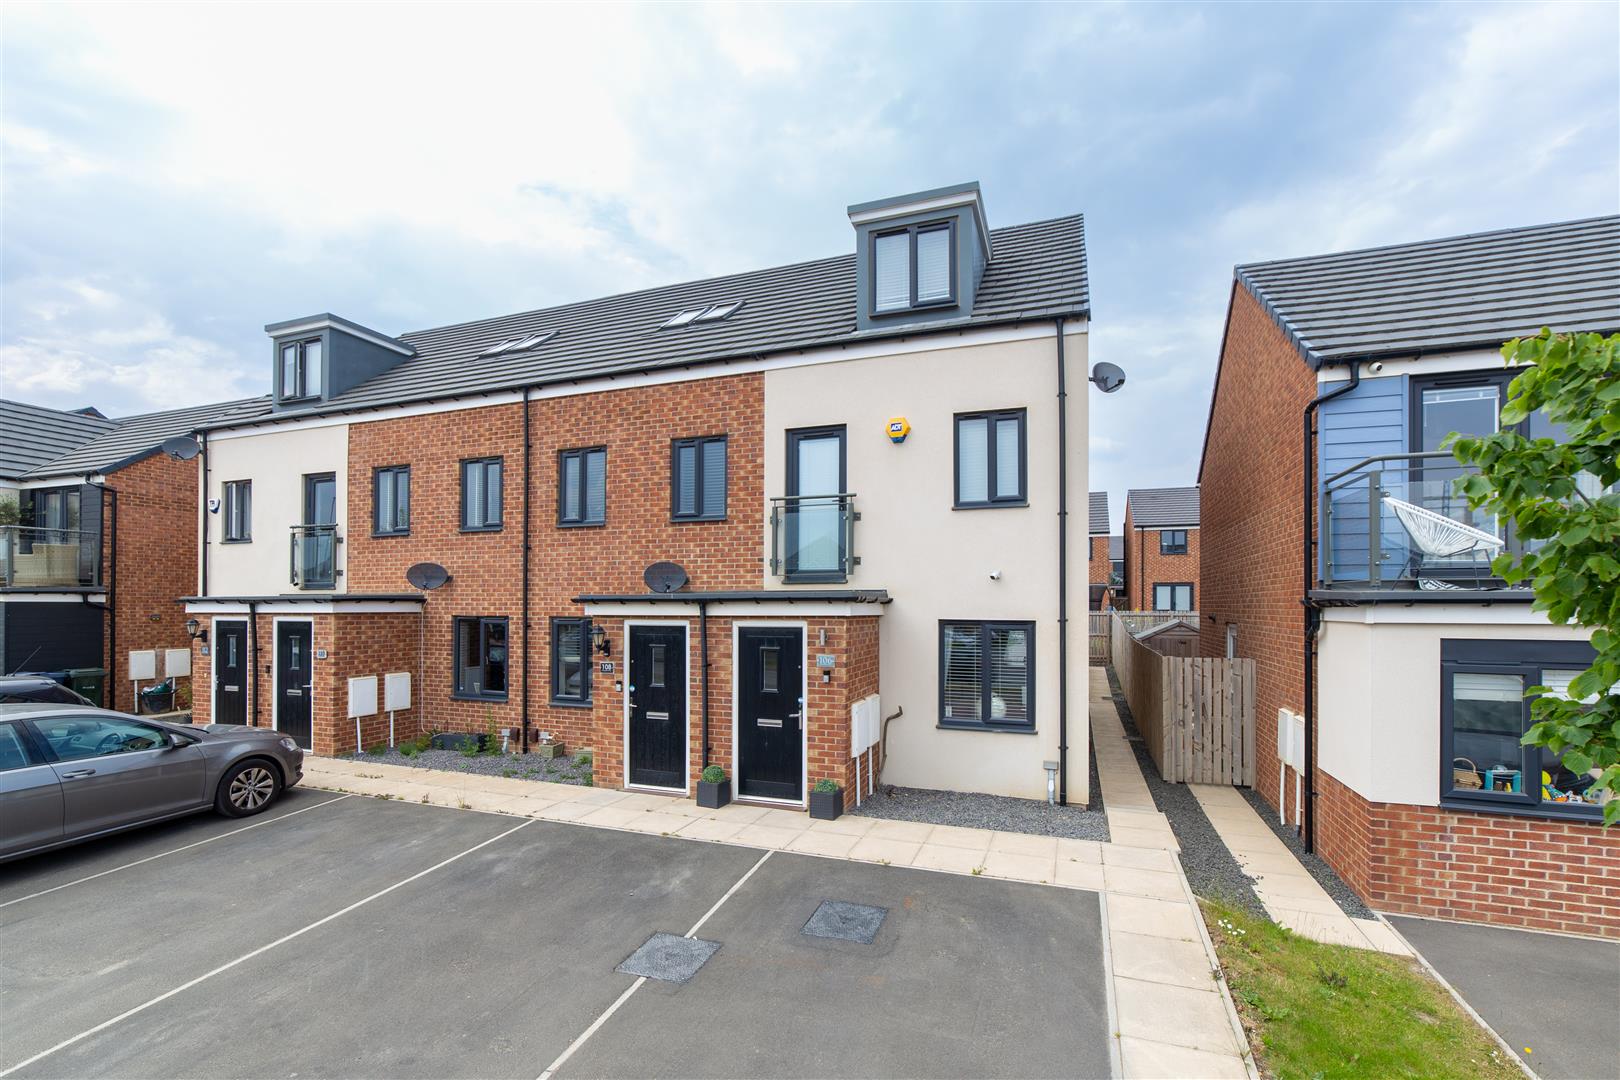 3 bed town house for sale in Roseden Way, Great Park, NE13